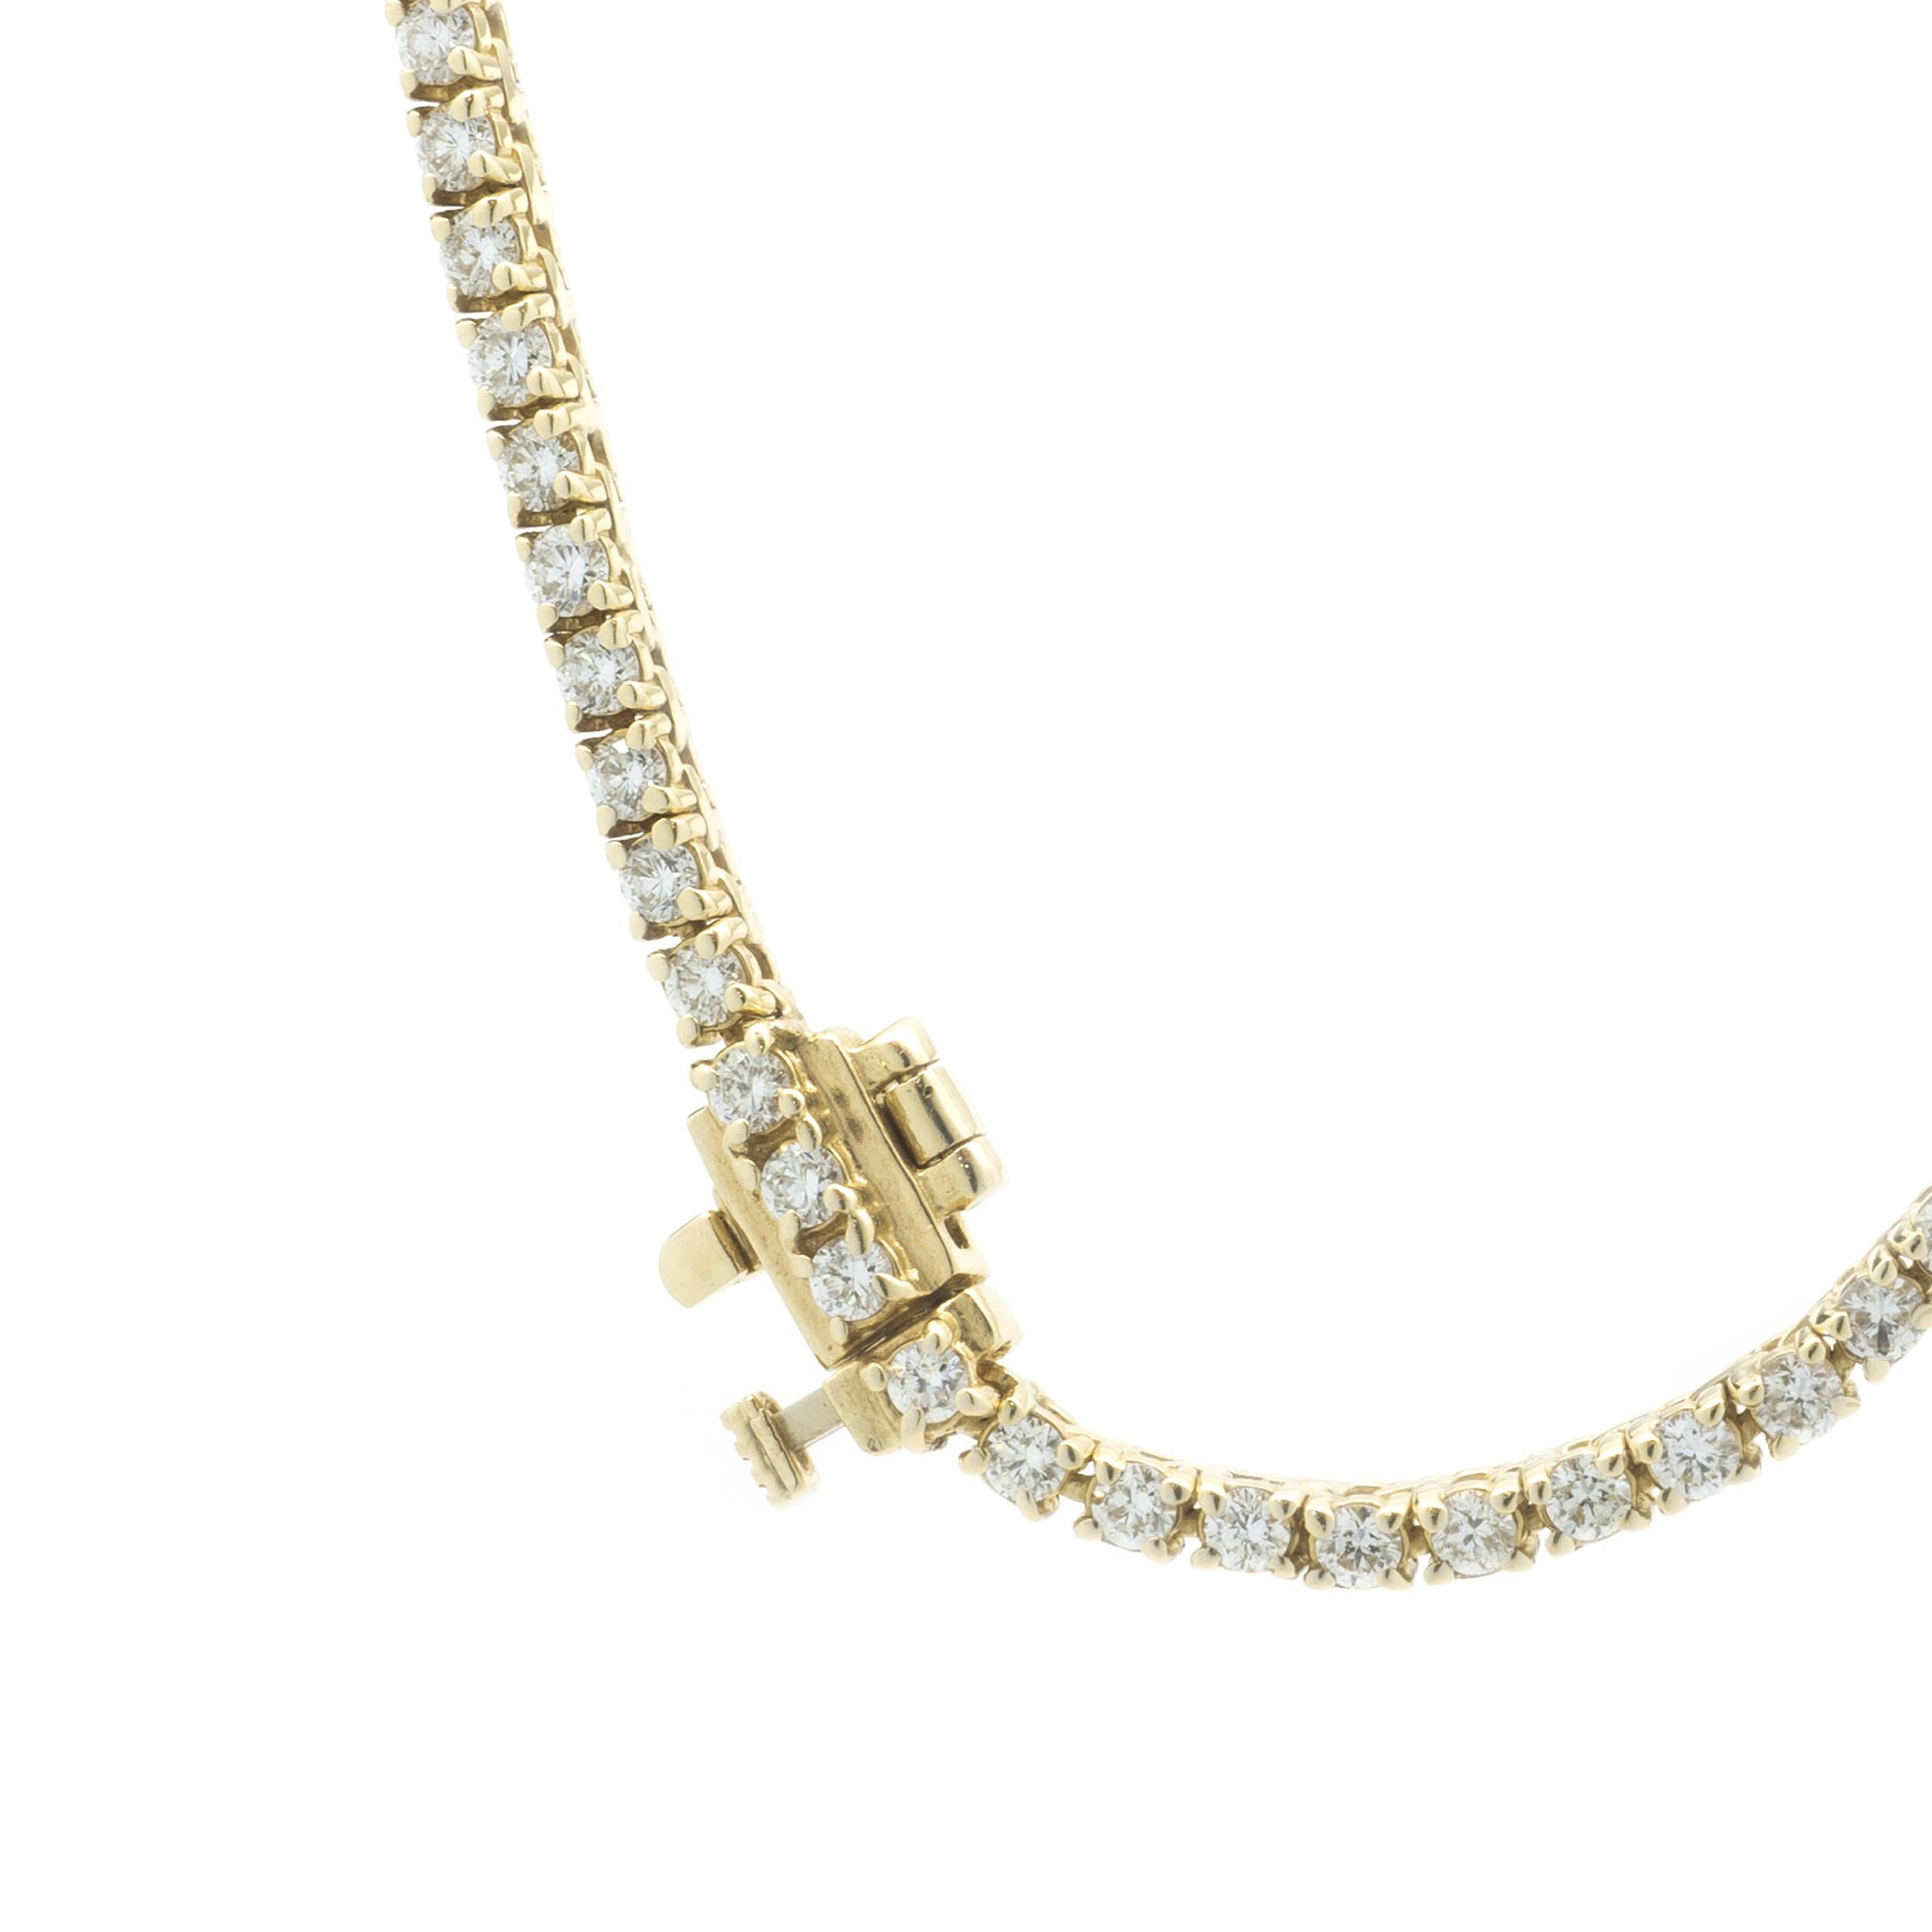 Designer: custom
Material: 14K yellow gold
Diamonds: 161 round brilliant cut = 6.77cttw
Color: H
Clarity: VS1
Dimensions: necklace measures 17-inches
Weight: 20.37 grams
